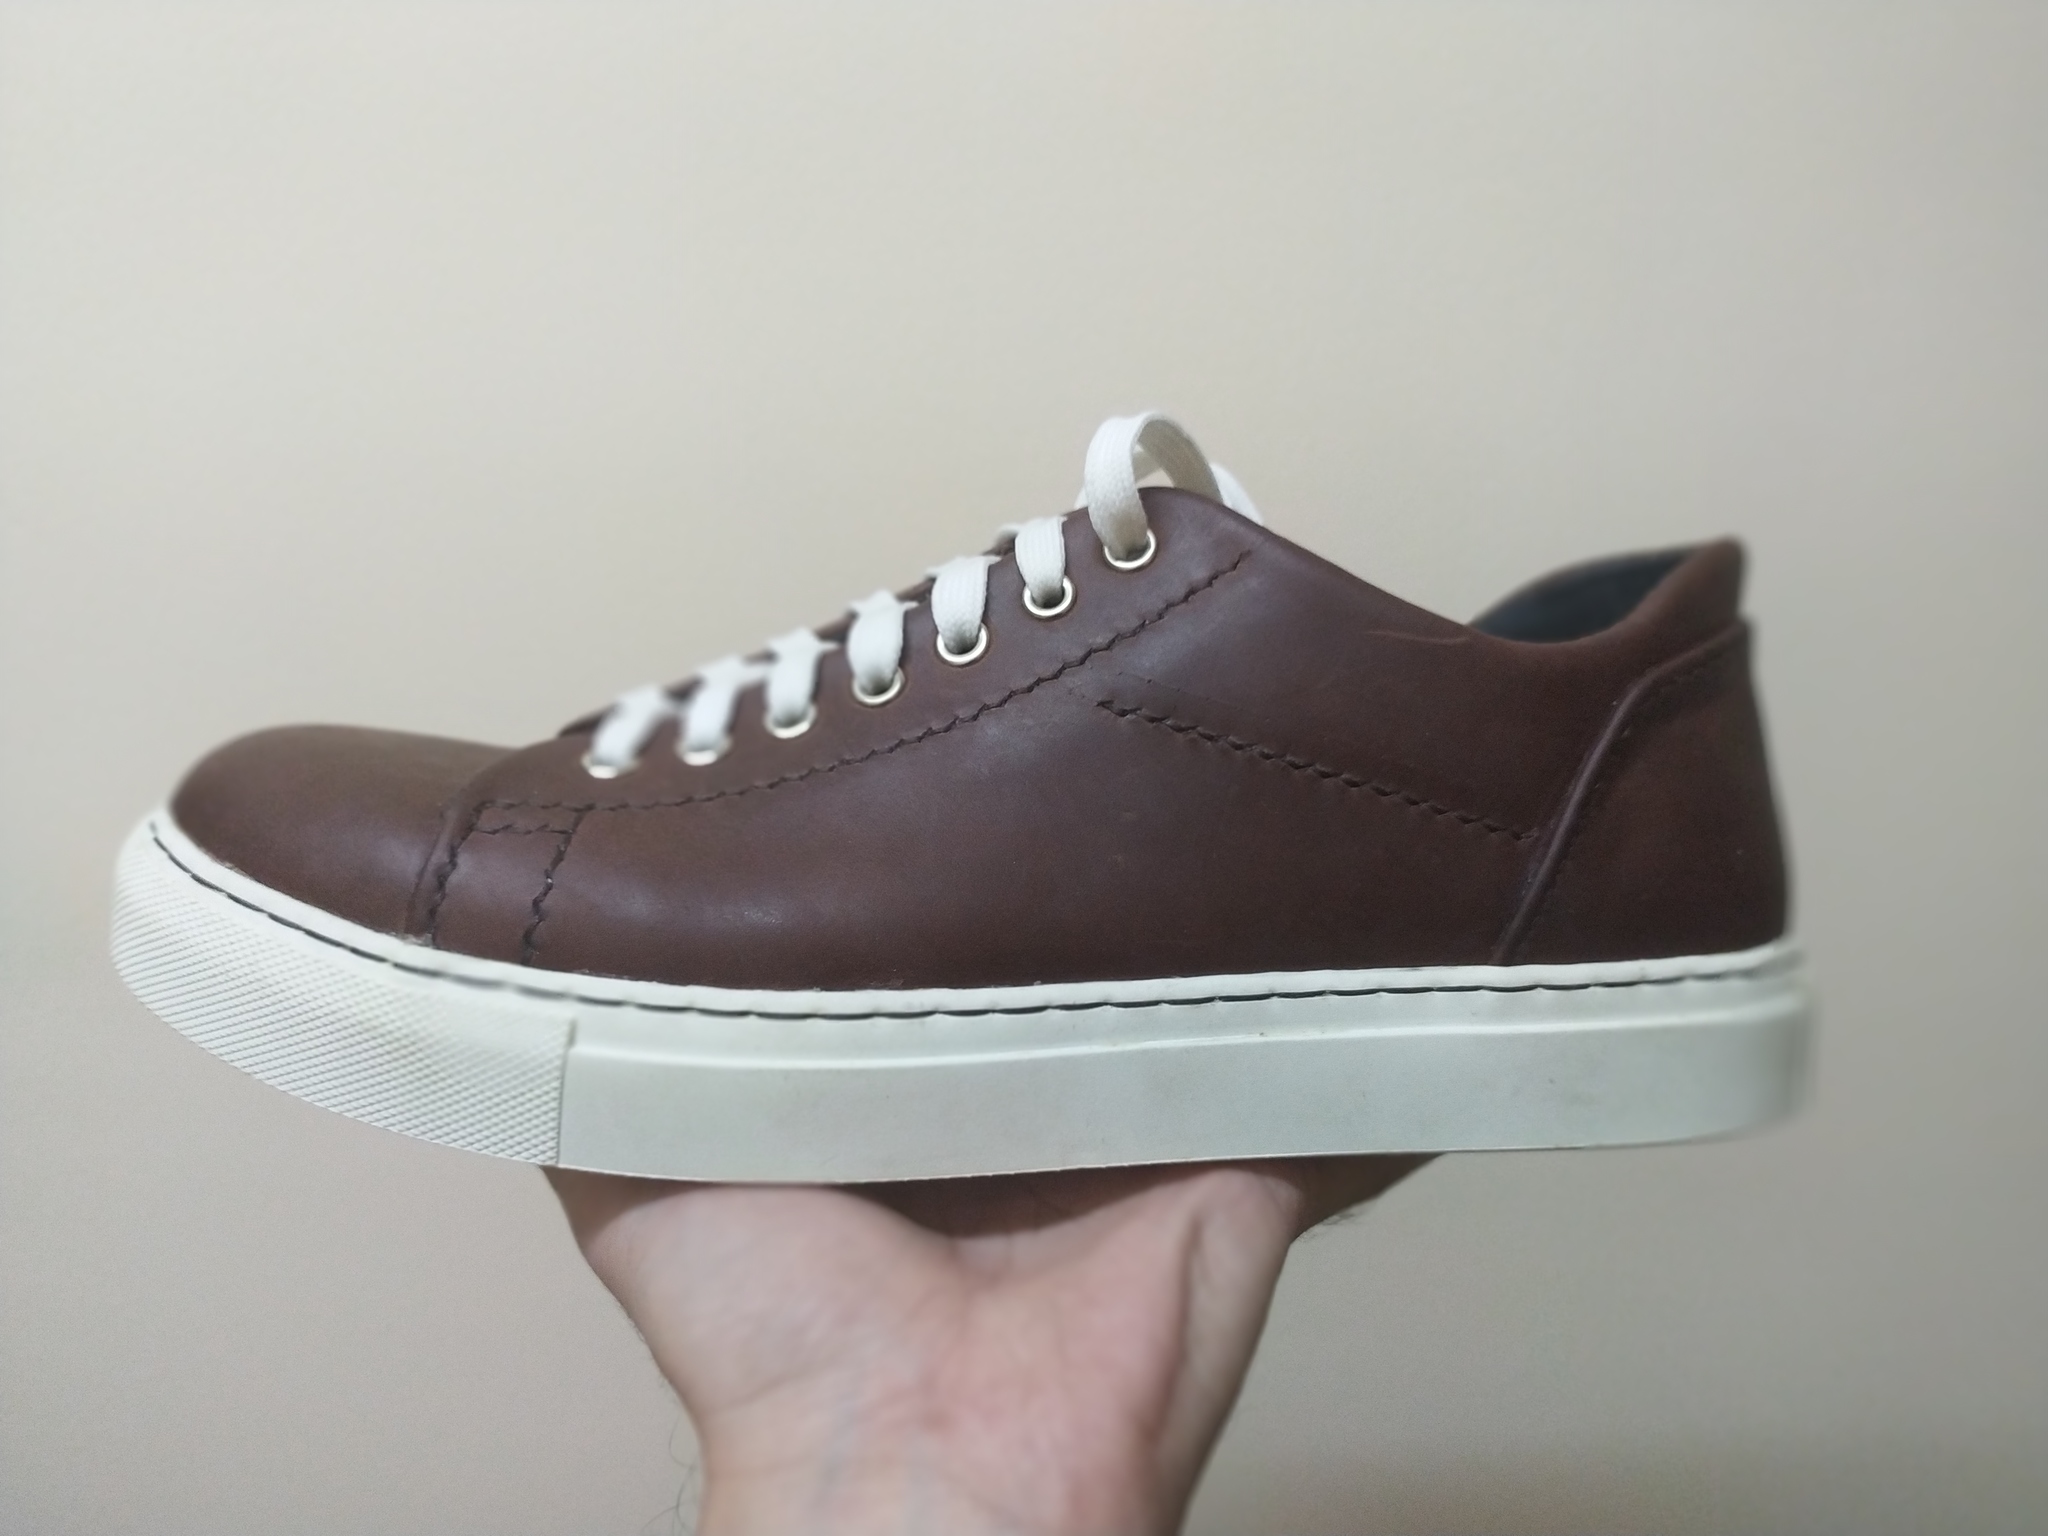 Here are my second shoes (hand sewn) - My, Sneakers, Handmade, Leather products, Shoes, Leather craft, Hobby, Leather, Longpost, Needlework with process